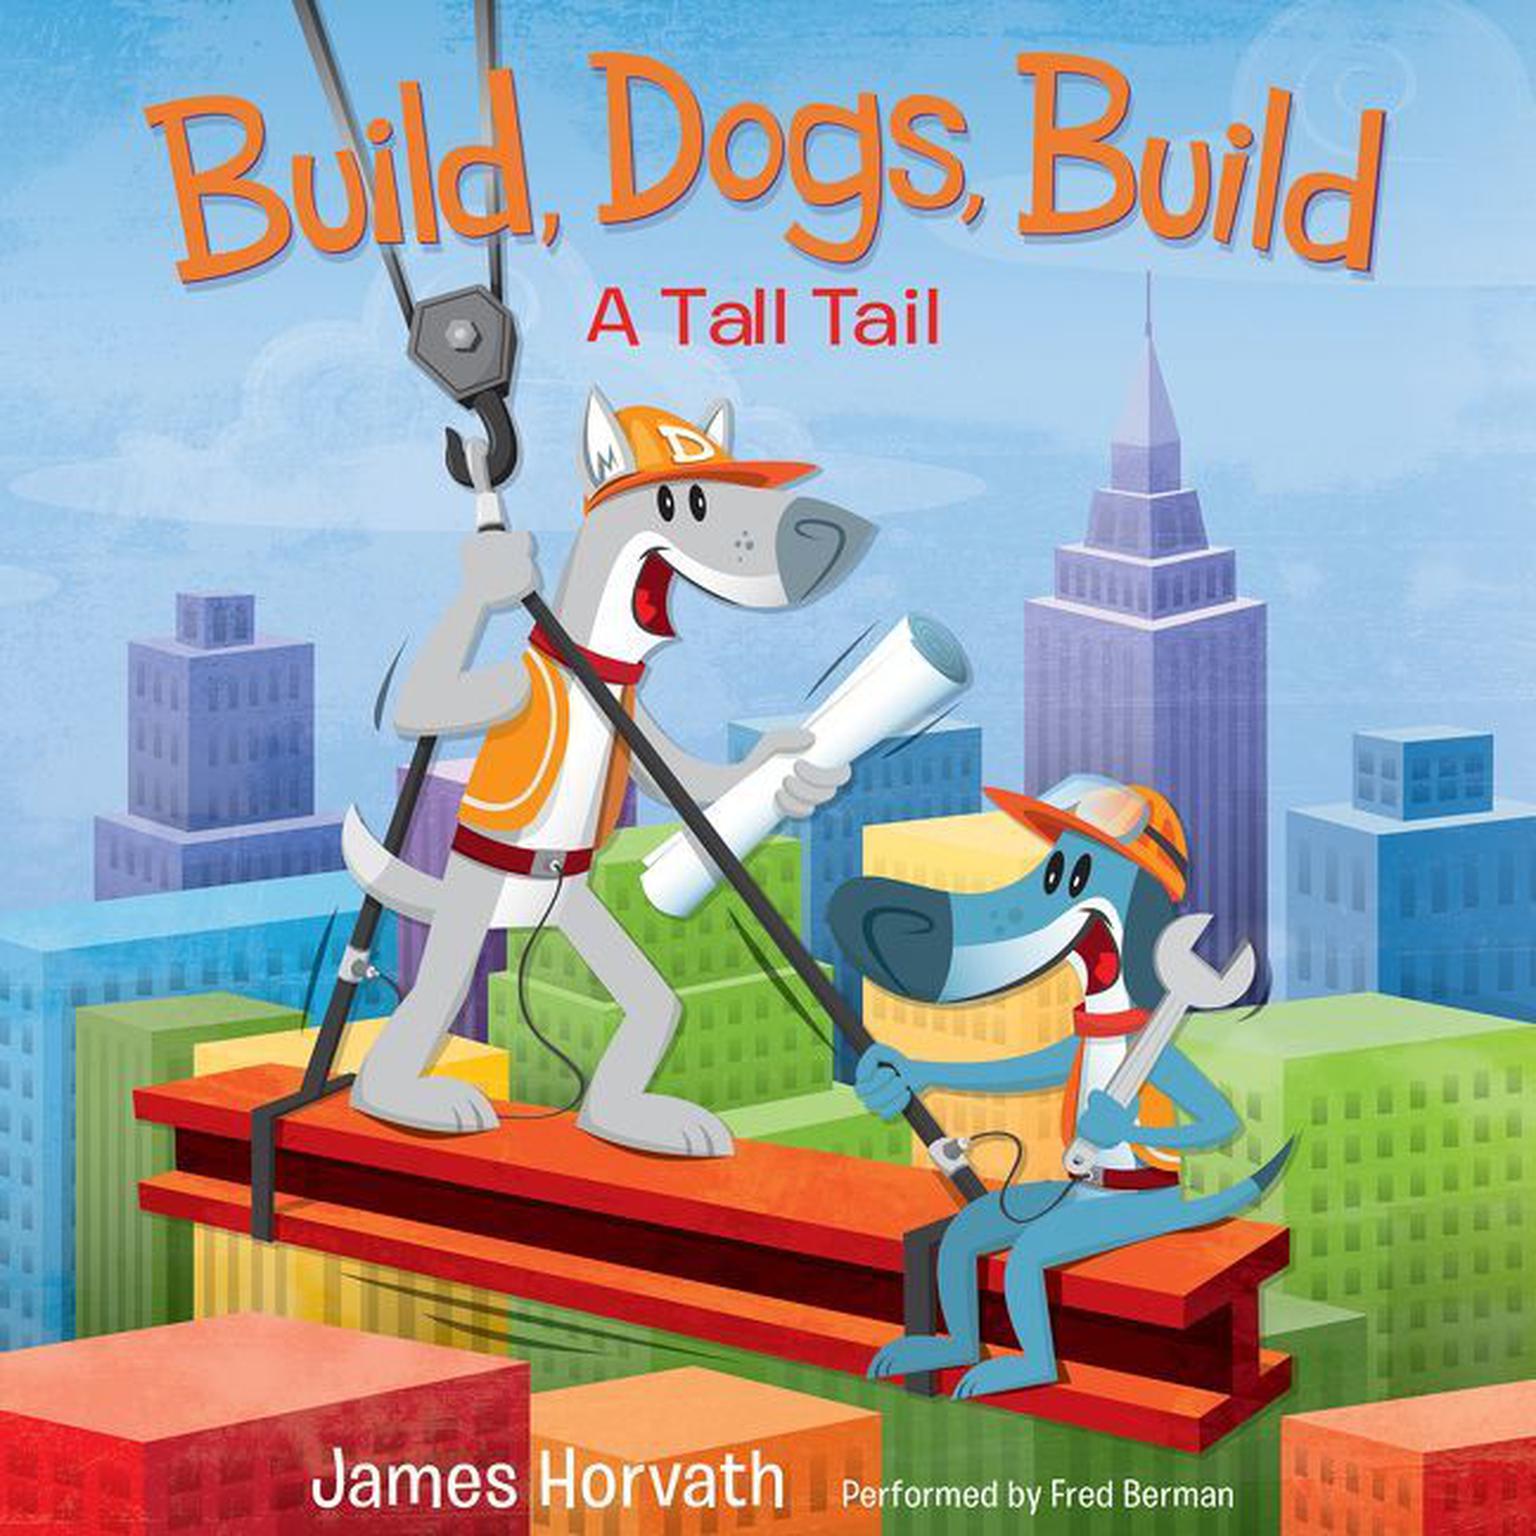 Build, Dogs, Build: A Tall Tail Audiobook, by James Horvath